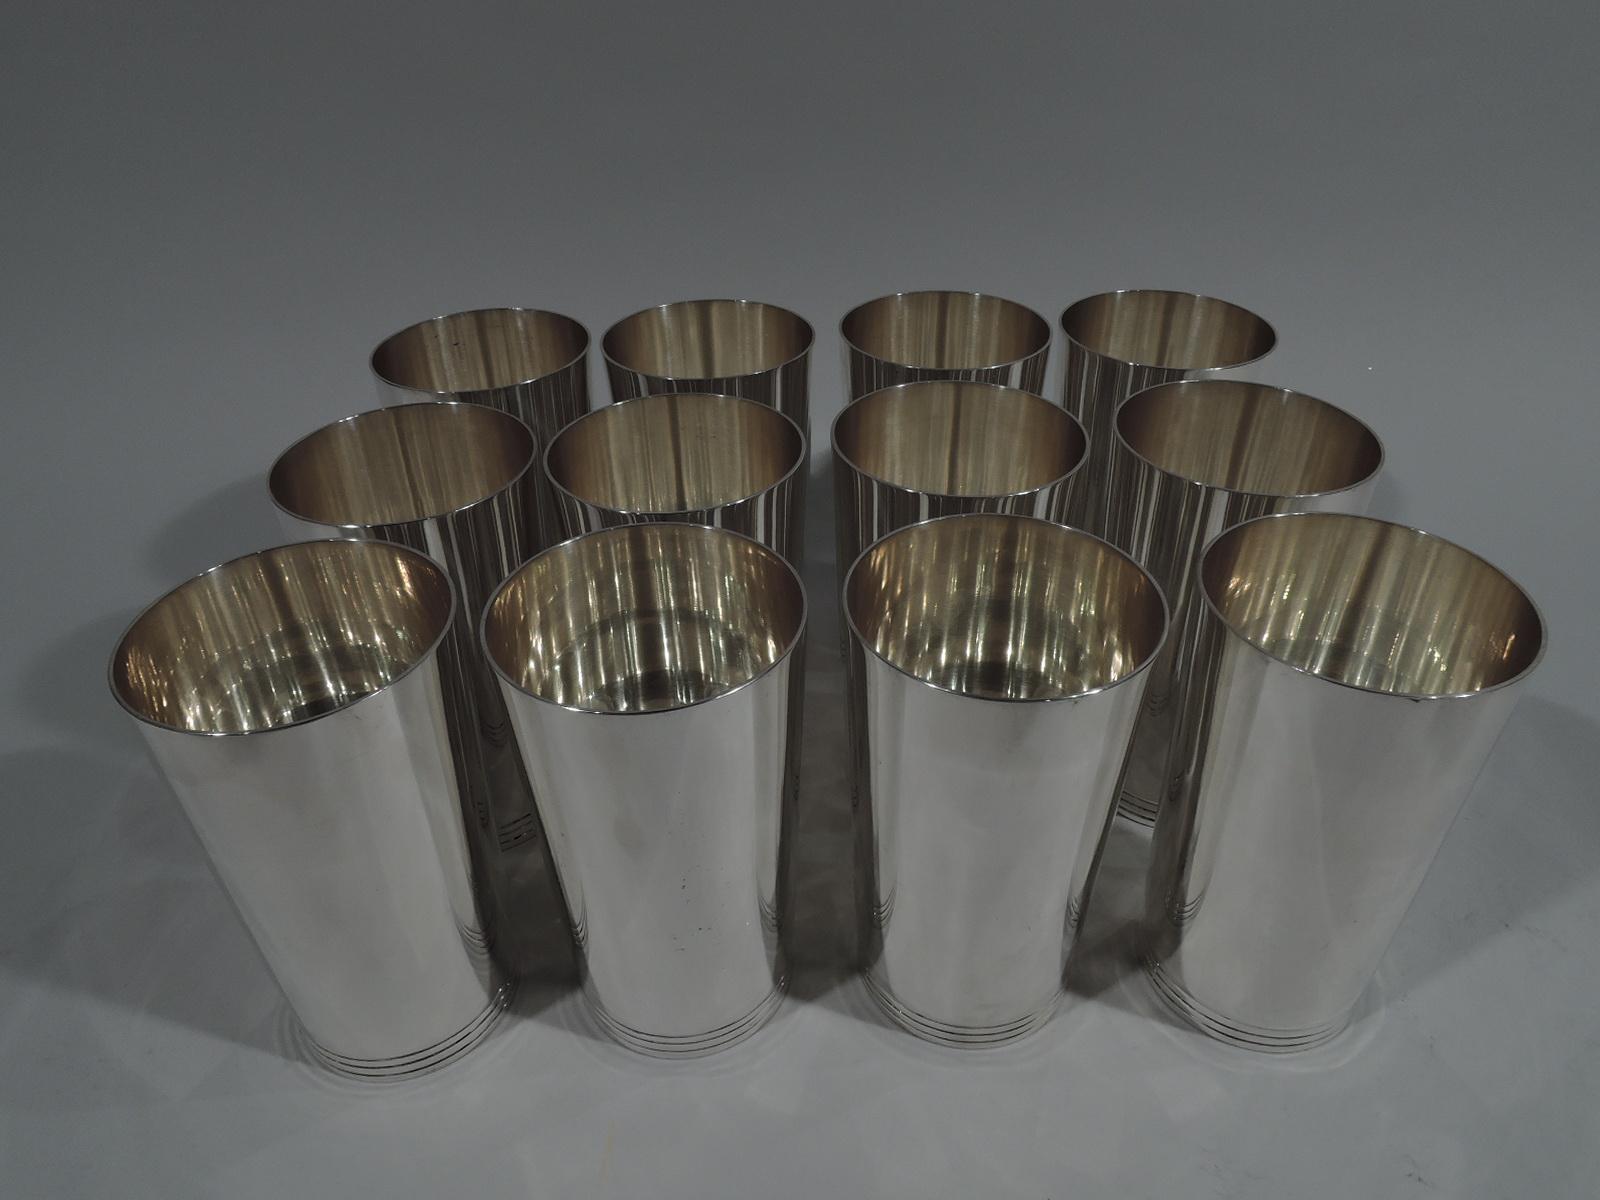 Set of 12 fabulous Art Deco sterling silver highballs. Made by Tiffany & Co. in New York. Each: Cylindrical with curved bottom. Clean and spare with incised bands at base. Easy-grip size for knocking ’em back. Fully marked including pattern no.